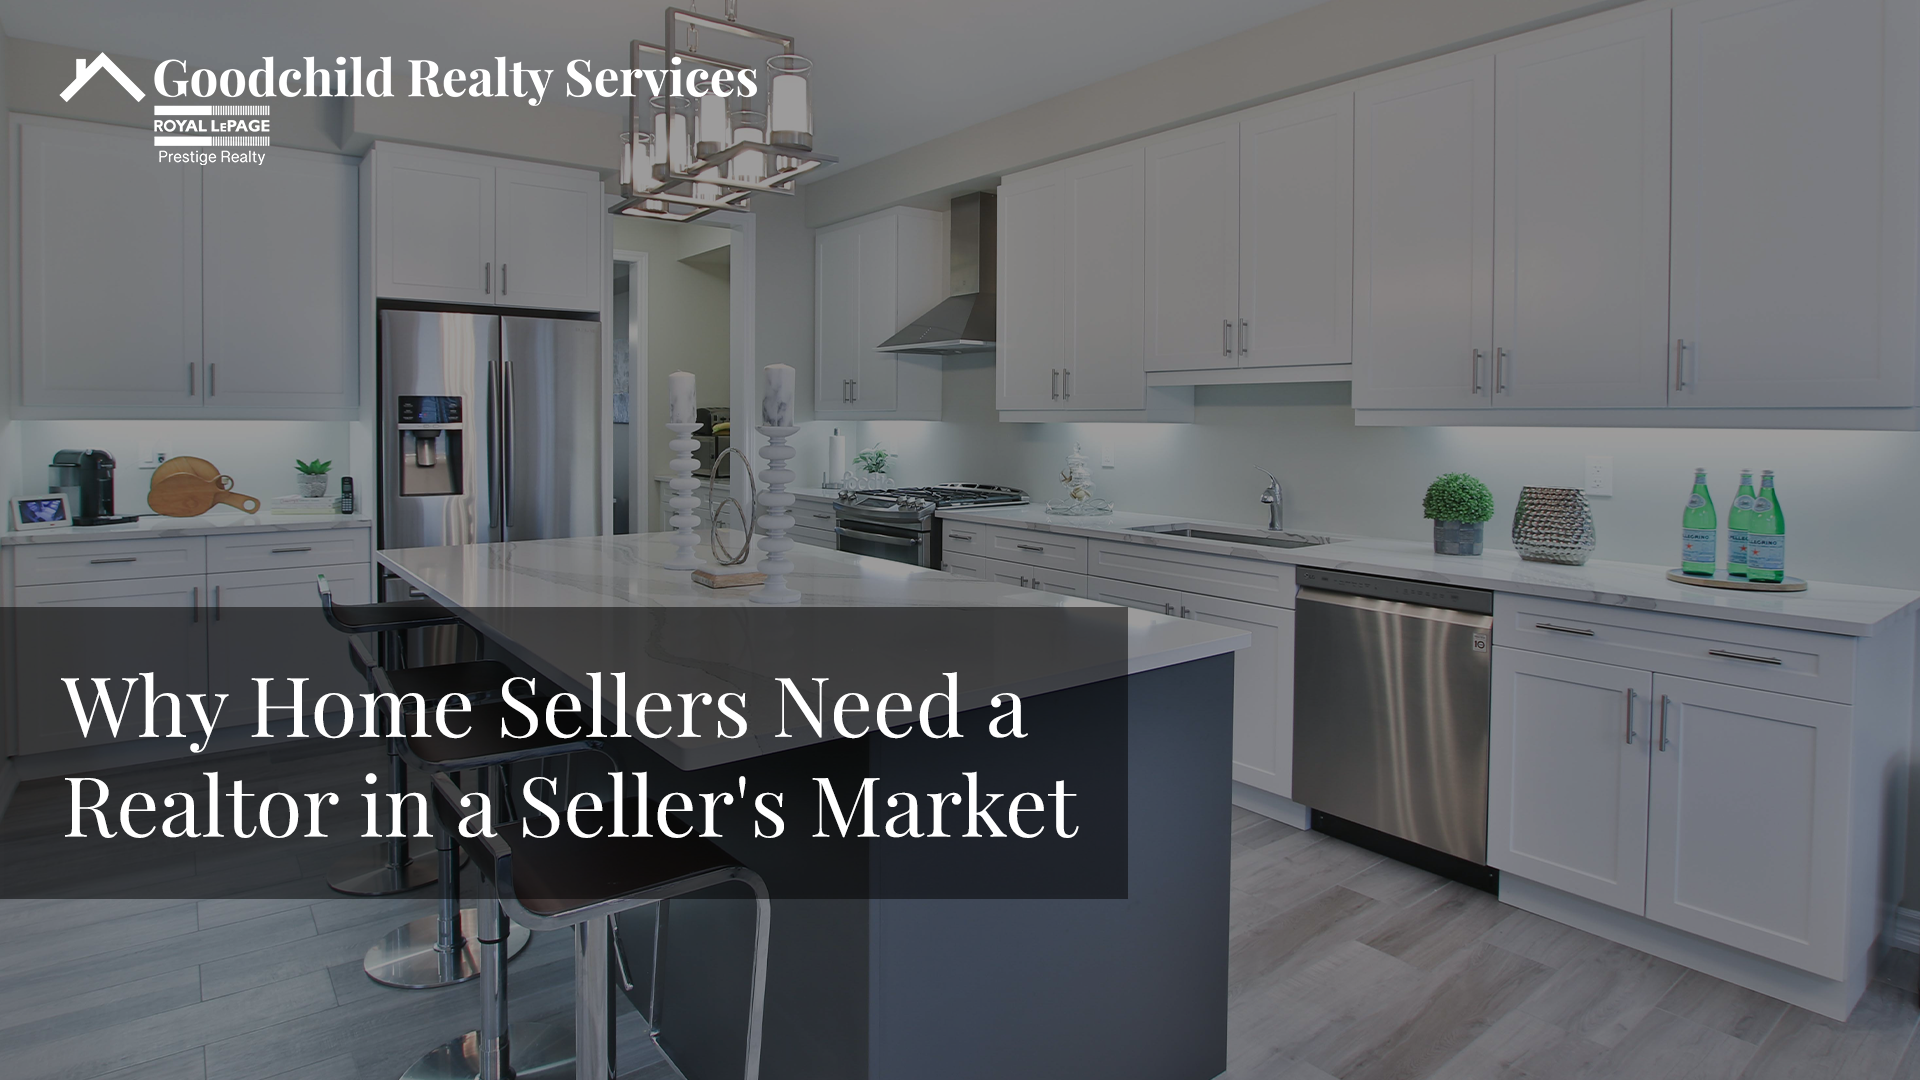 Why Home Sellers Need a Realtor in a Seller’s Market: Part 2